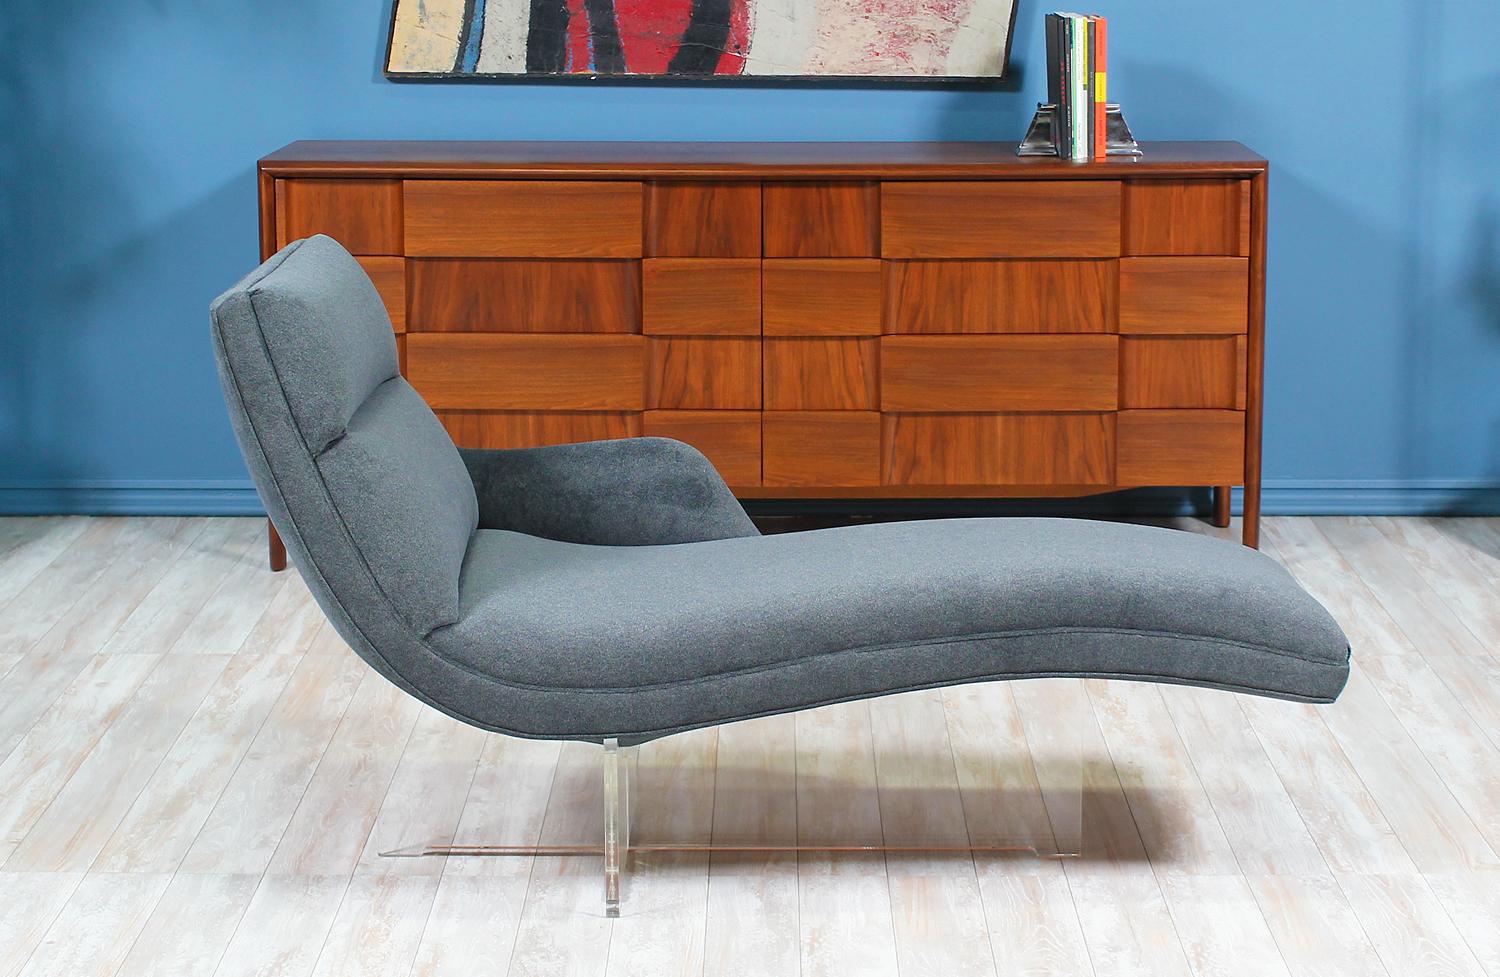 Sophisticated Chaise Lounge designed by Vladimir Kagan for Weiman Preview Furniture in the United States circa 1970’s. The “Erica” chaise was named after Kagan’s wife and features a sculptural “S” shaped seat rest. This piece has been newly